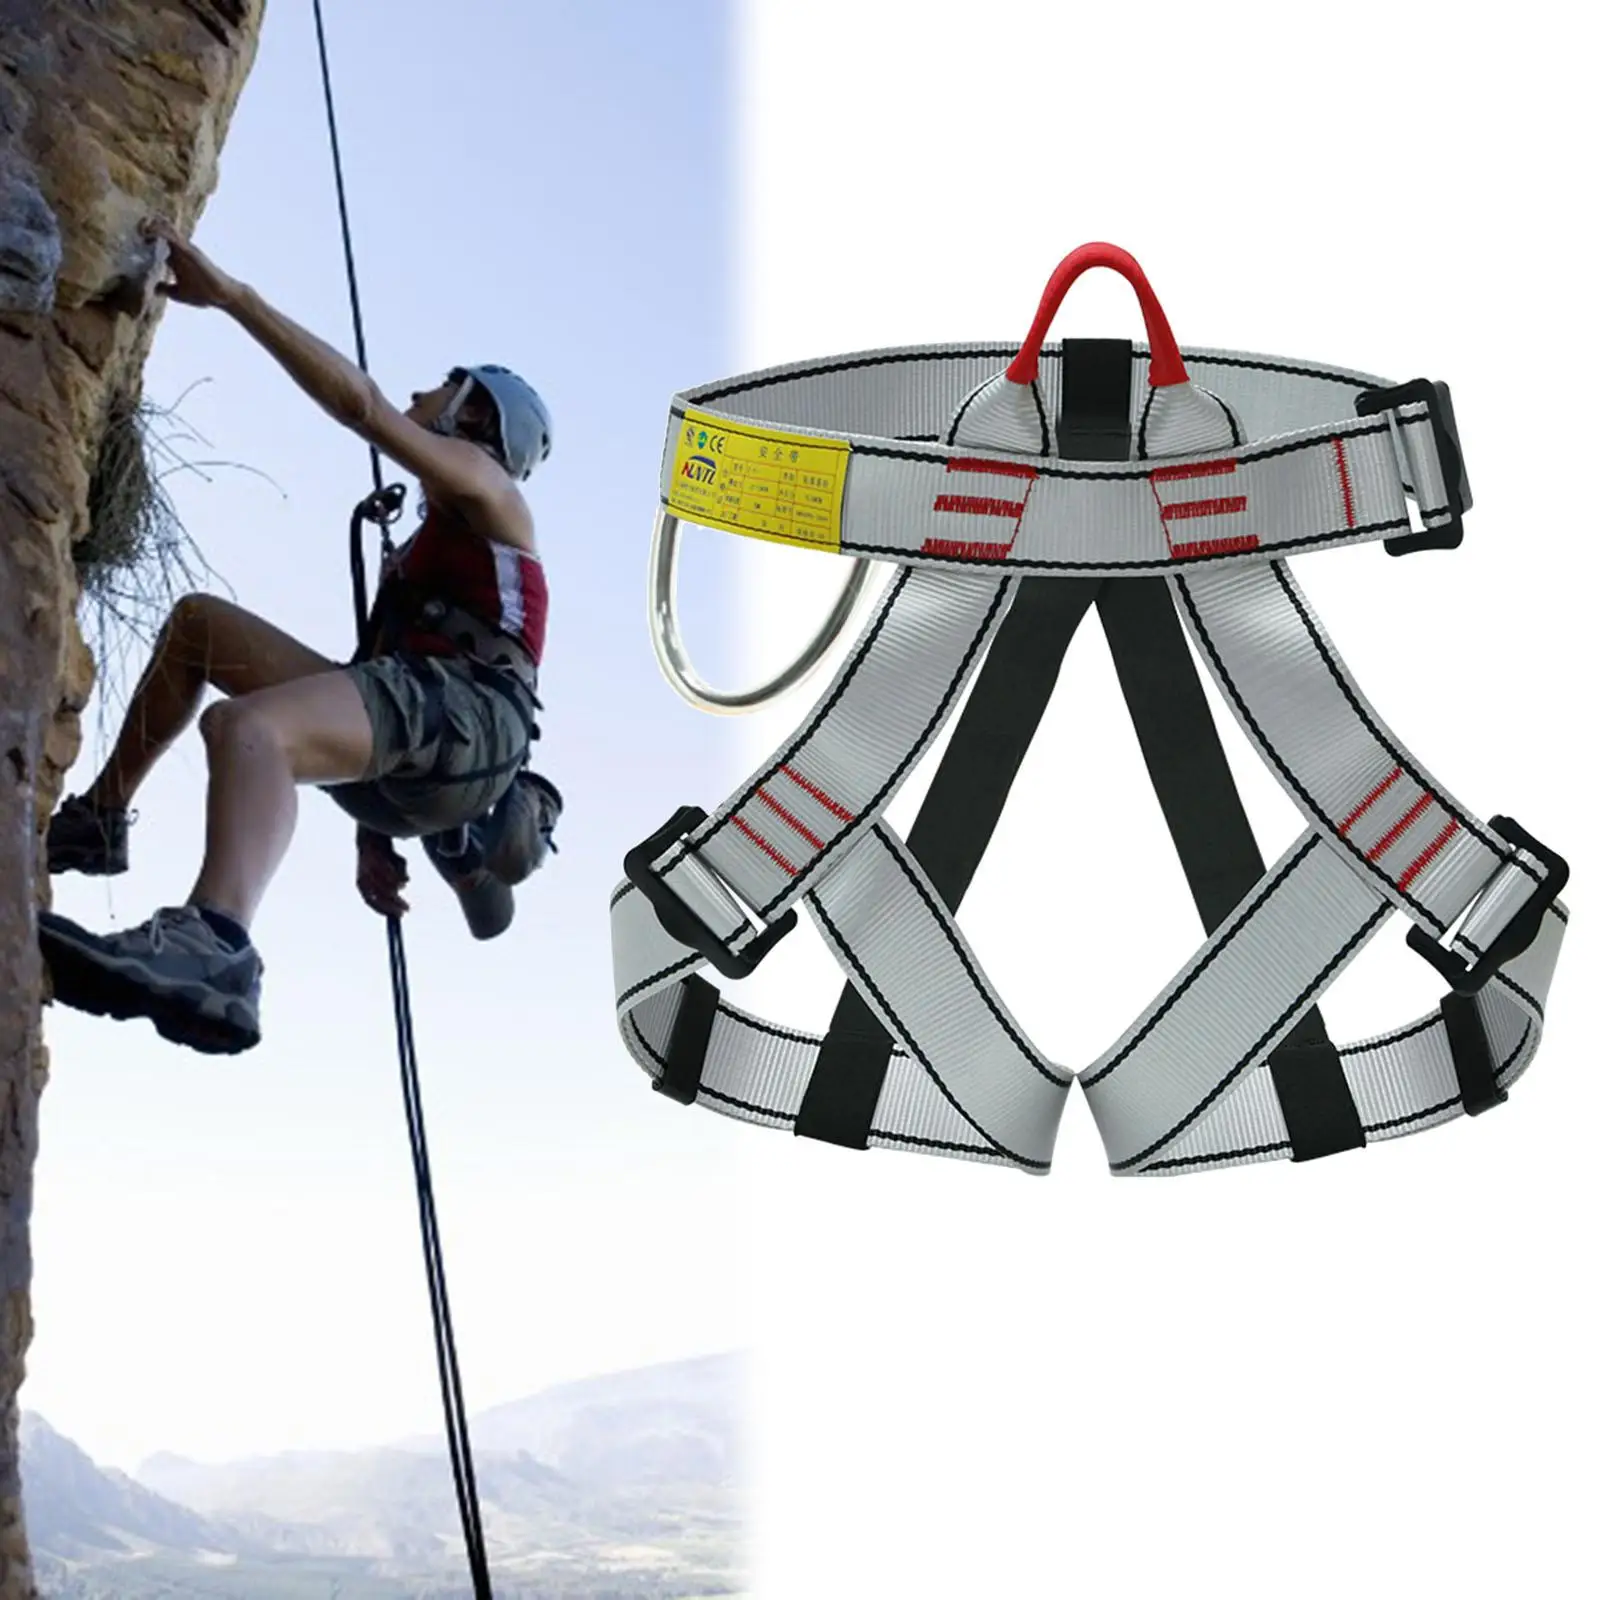 Professional Outdoor Sports Safety Belt Rock Mountain Climbing Harness Half Body Harness for Adults Men Women